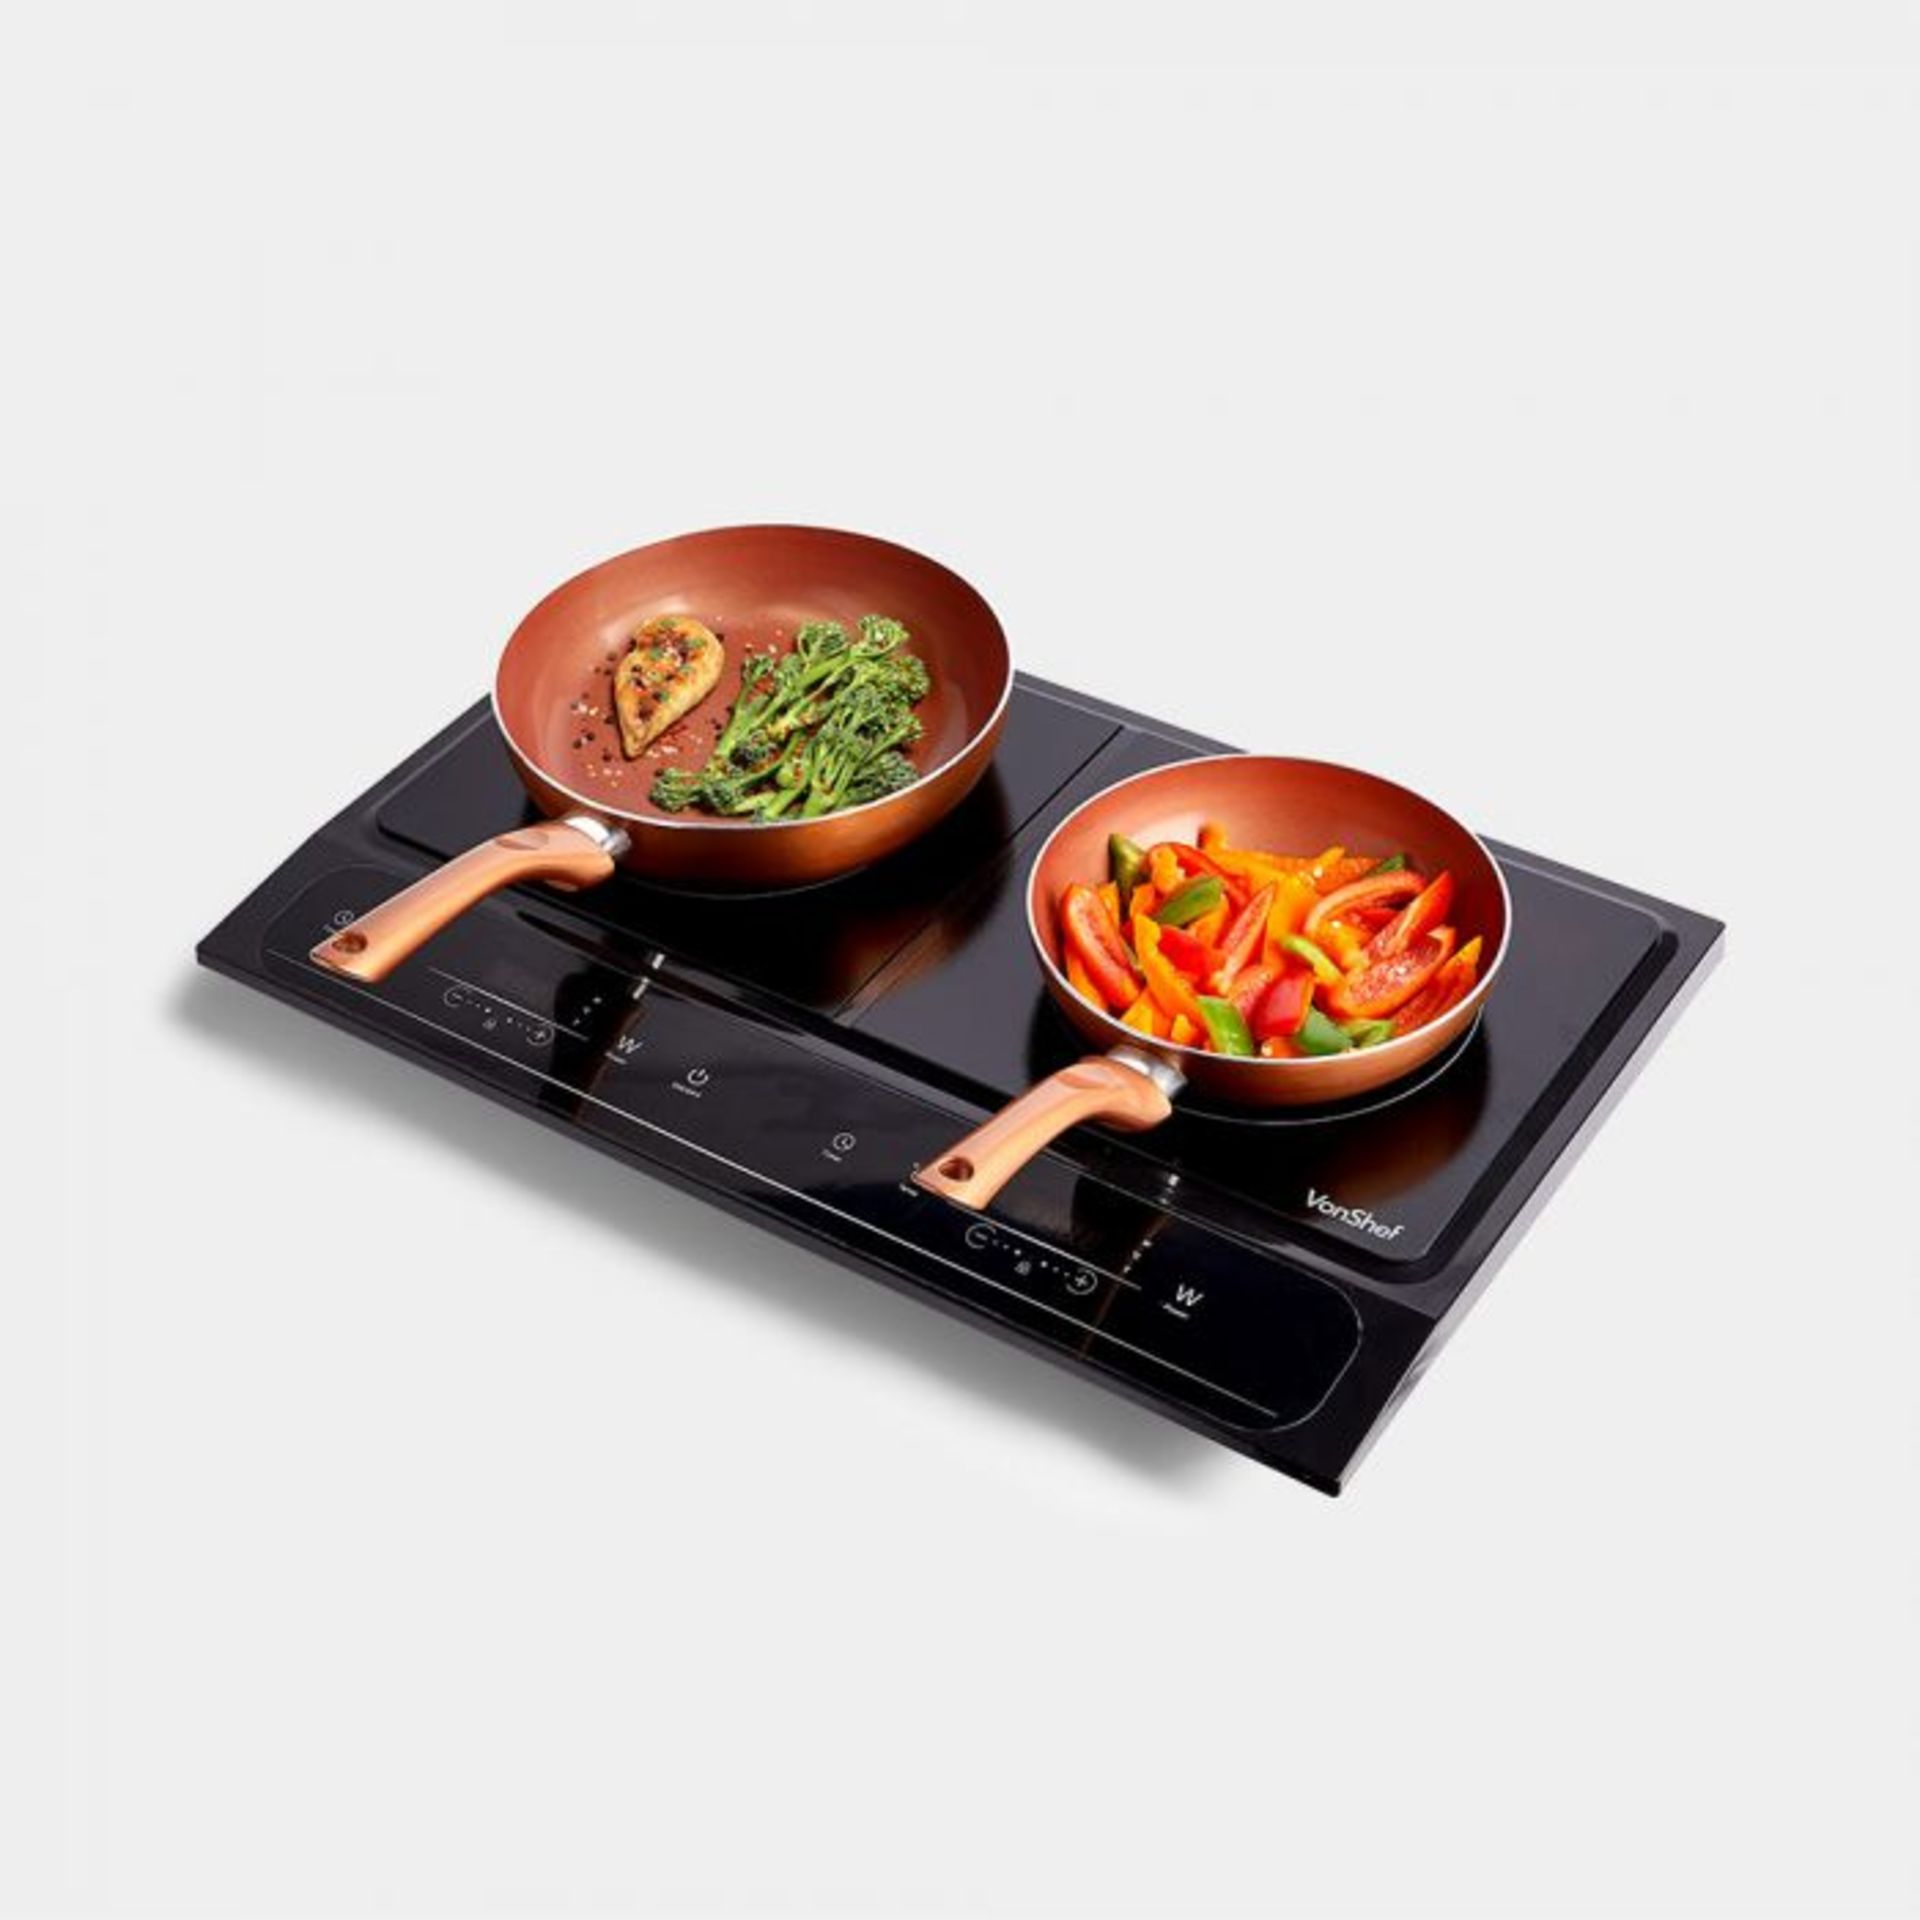 Dual Induction hob 2800W. For fast and fuss free cooking, why not try an induction hob?